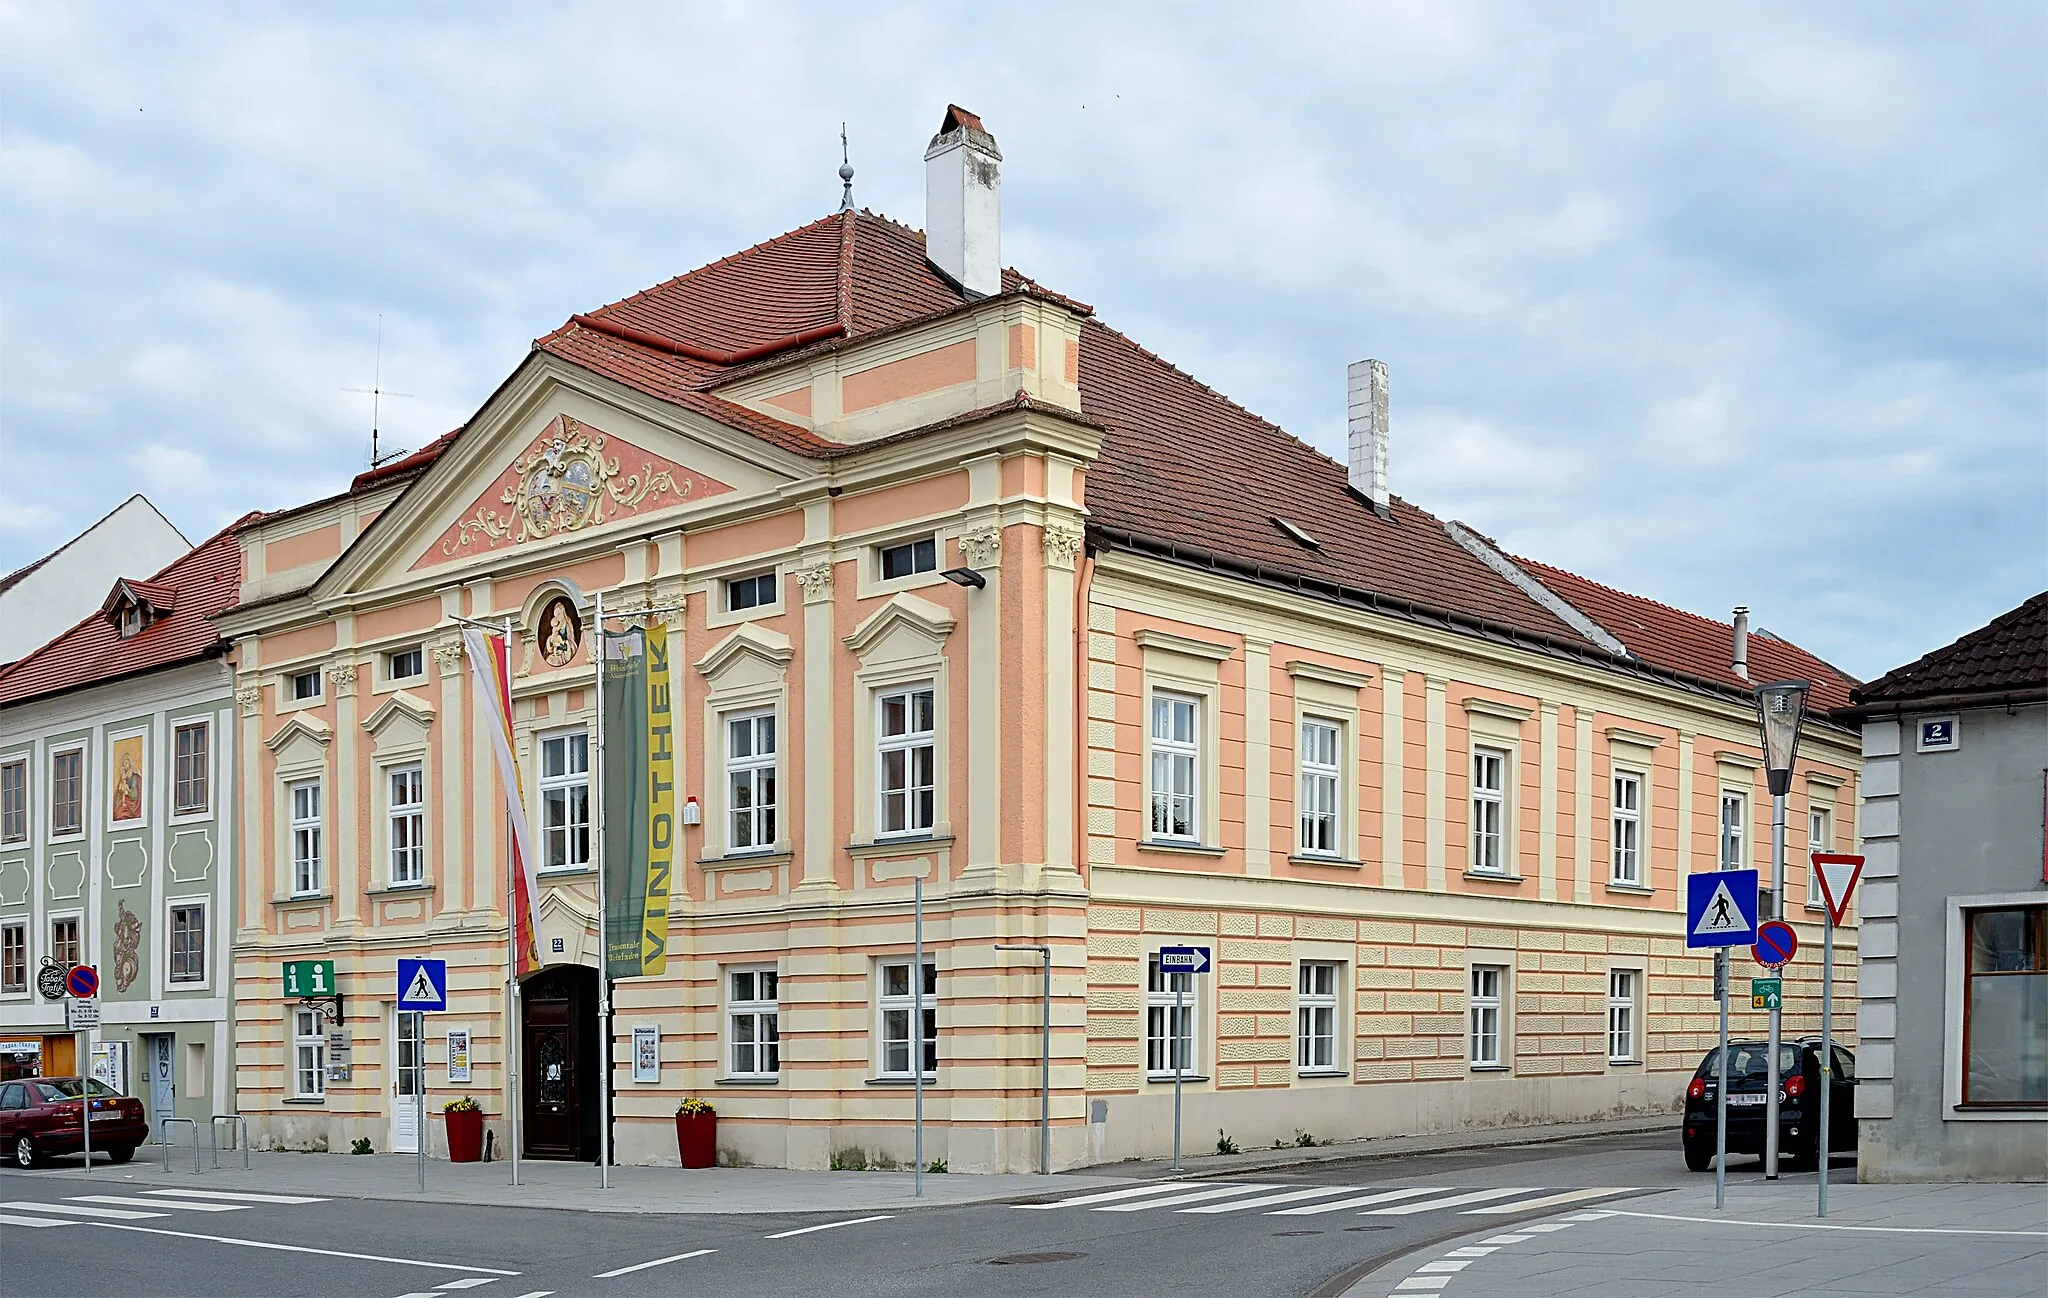 Photo showing: The former town hall of the Unterer Markt, now Reither-Haus, in Herzogenburg, Lower Austria, is protected as a cultural heritage monument. Now a cultural center and tourism information bureau.